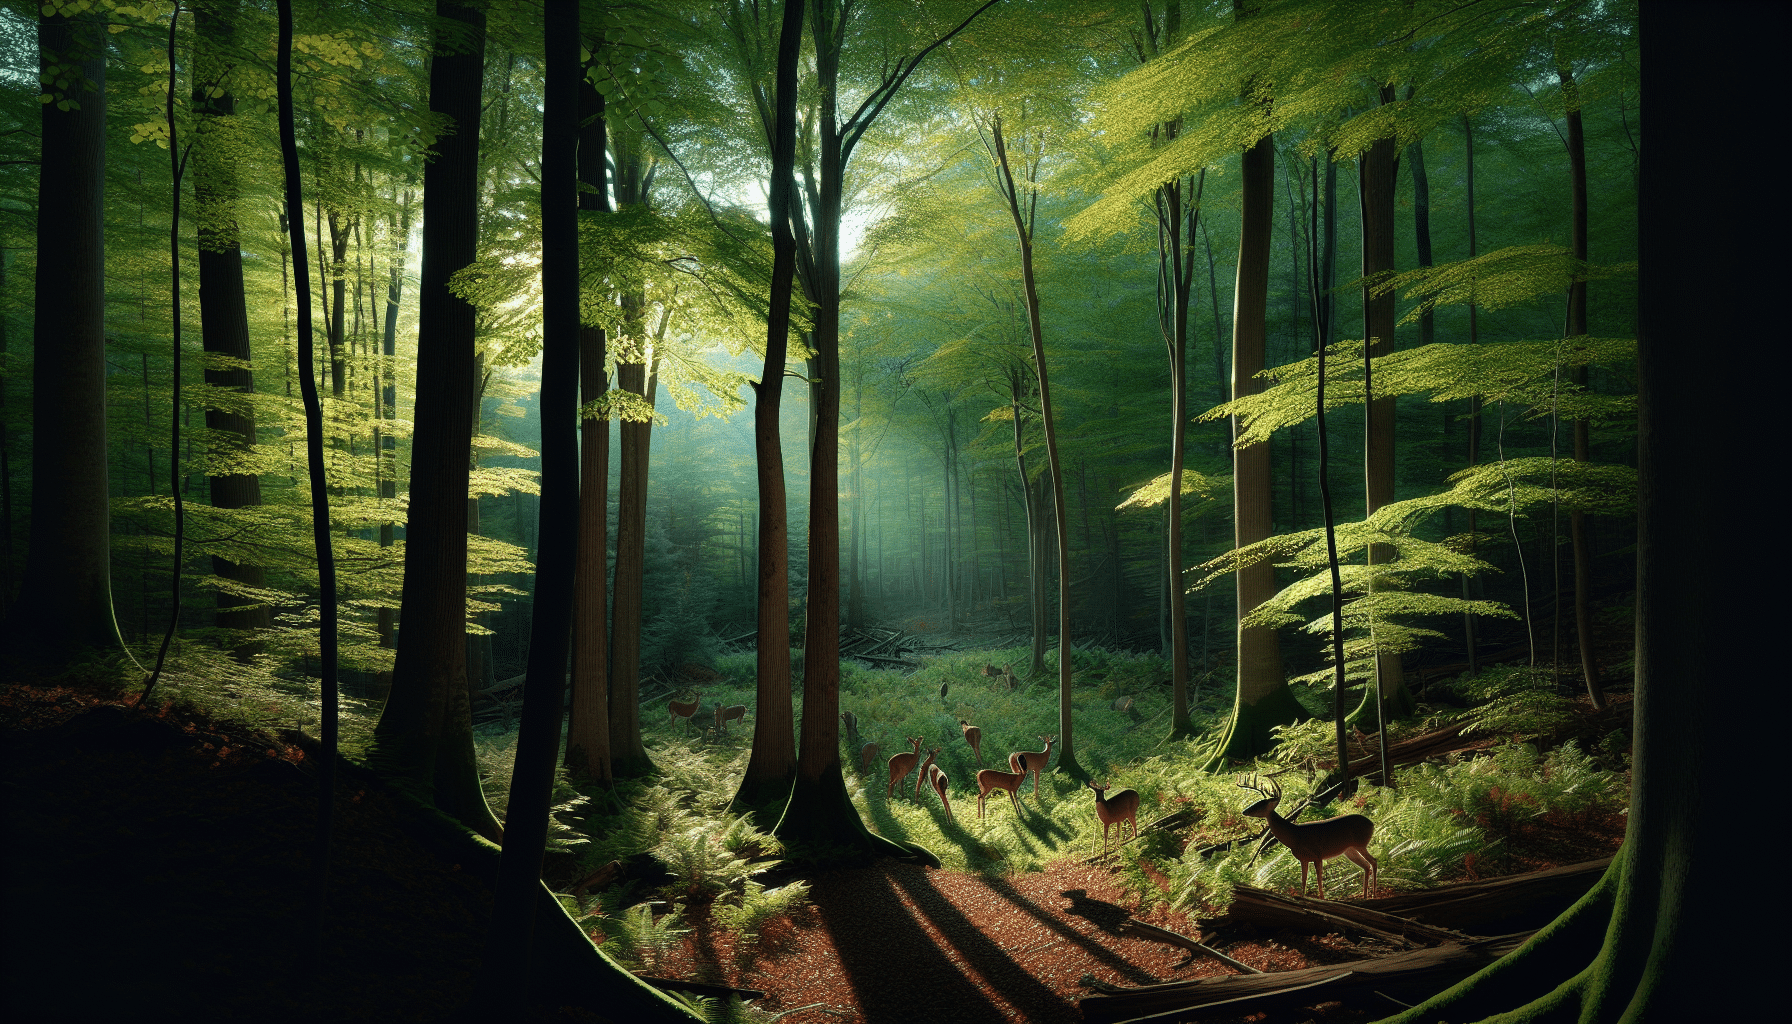 An image capturing the ideal hunting grounds in the state of Vermont. Featured predominantly is the lush green forest, comprised of a rich variety of trees painting a diverse spectrum of green. On the ground, there are fallen leaves signaling the onset of fall. Shadows come into play, indicating the play of light and darkness that spills over the landscape. A family of deer can be seen in the distance, grazing peacefully amidst the foliage, unaware of the hunting season. No humans or human associated brands can be seen.